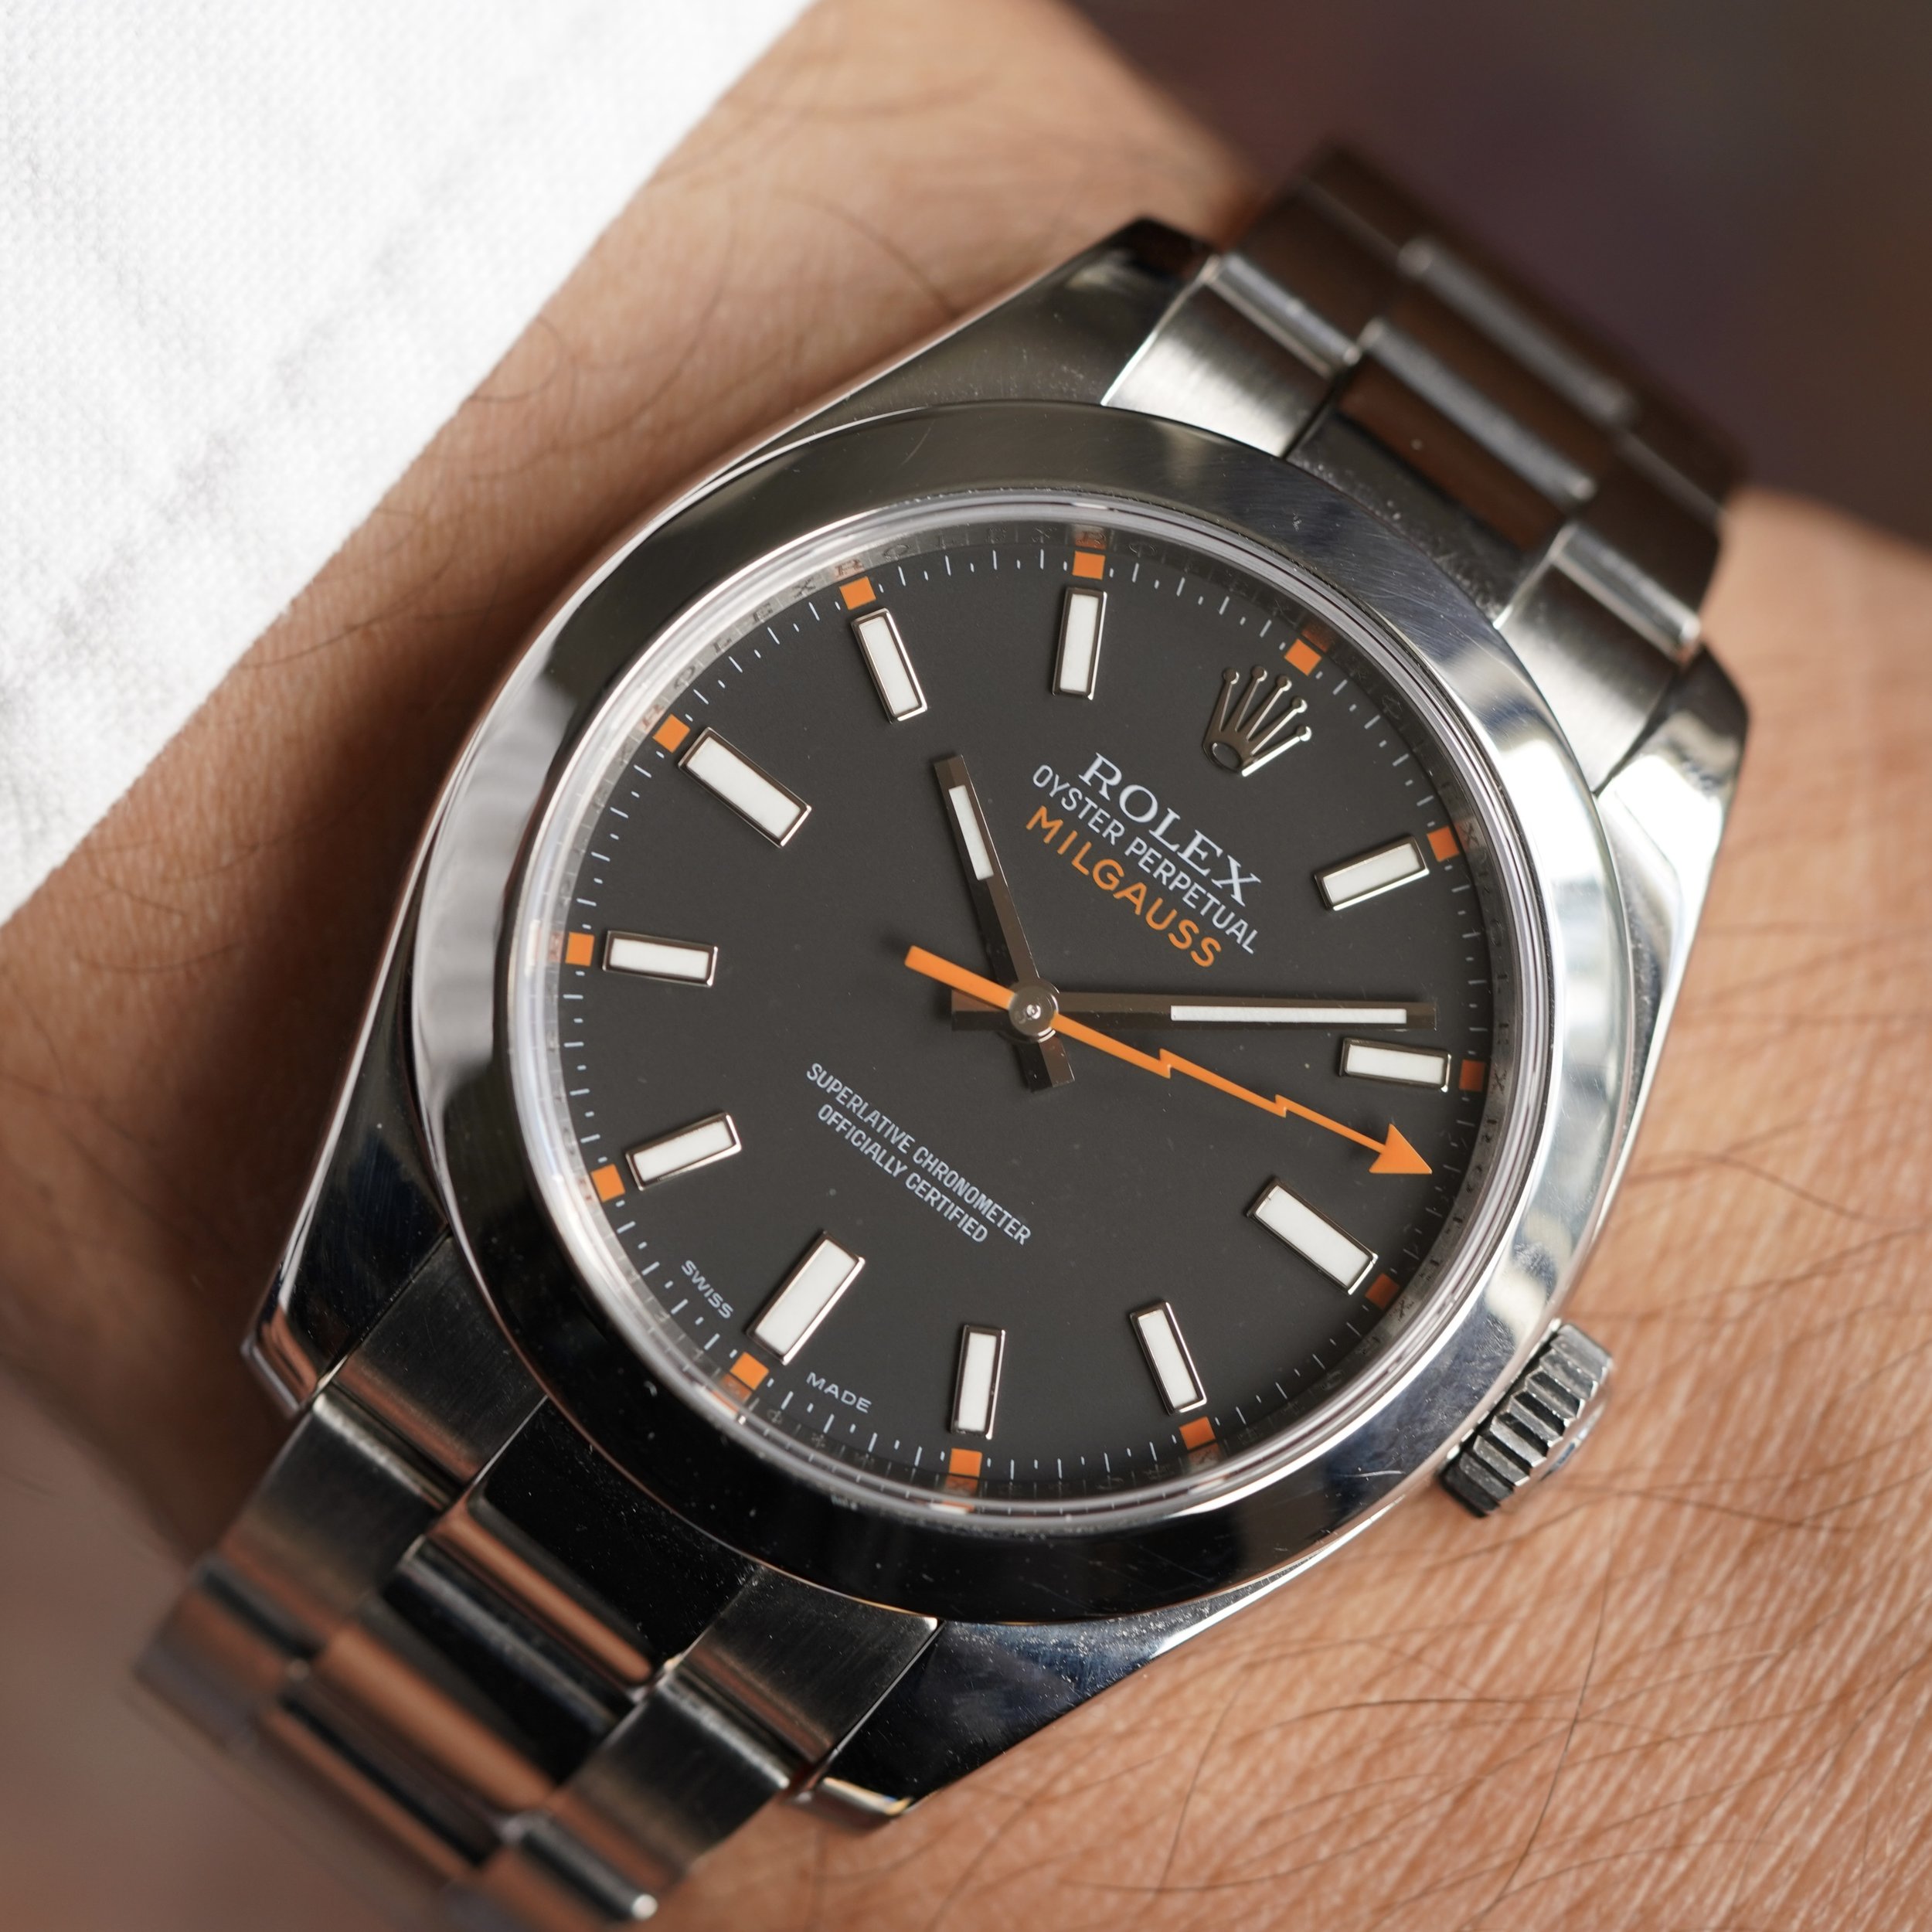 Rolex Milgauss Reference 116400 Black Dial w/ Box and Service Card ...